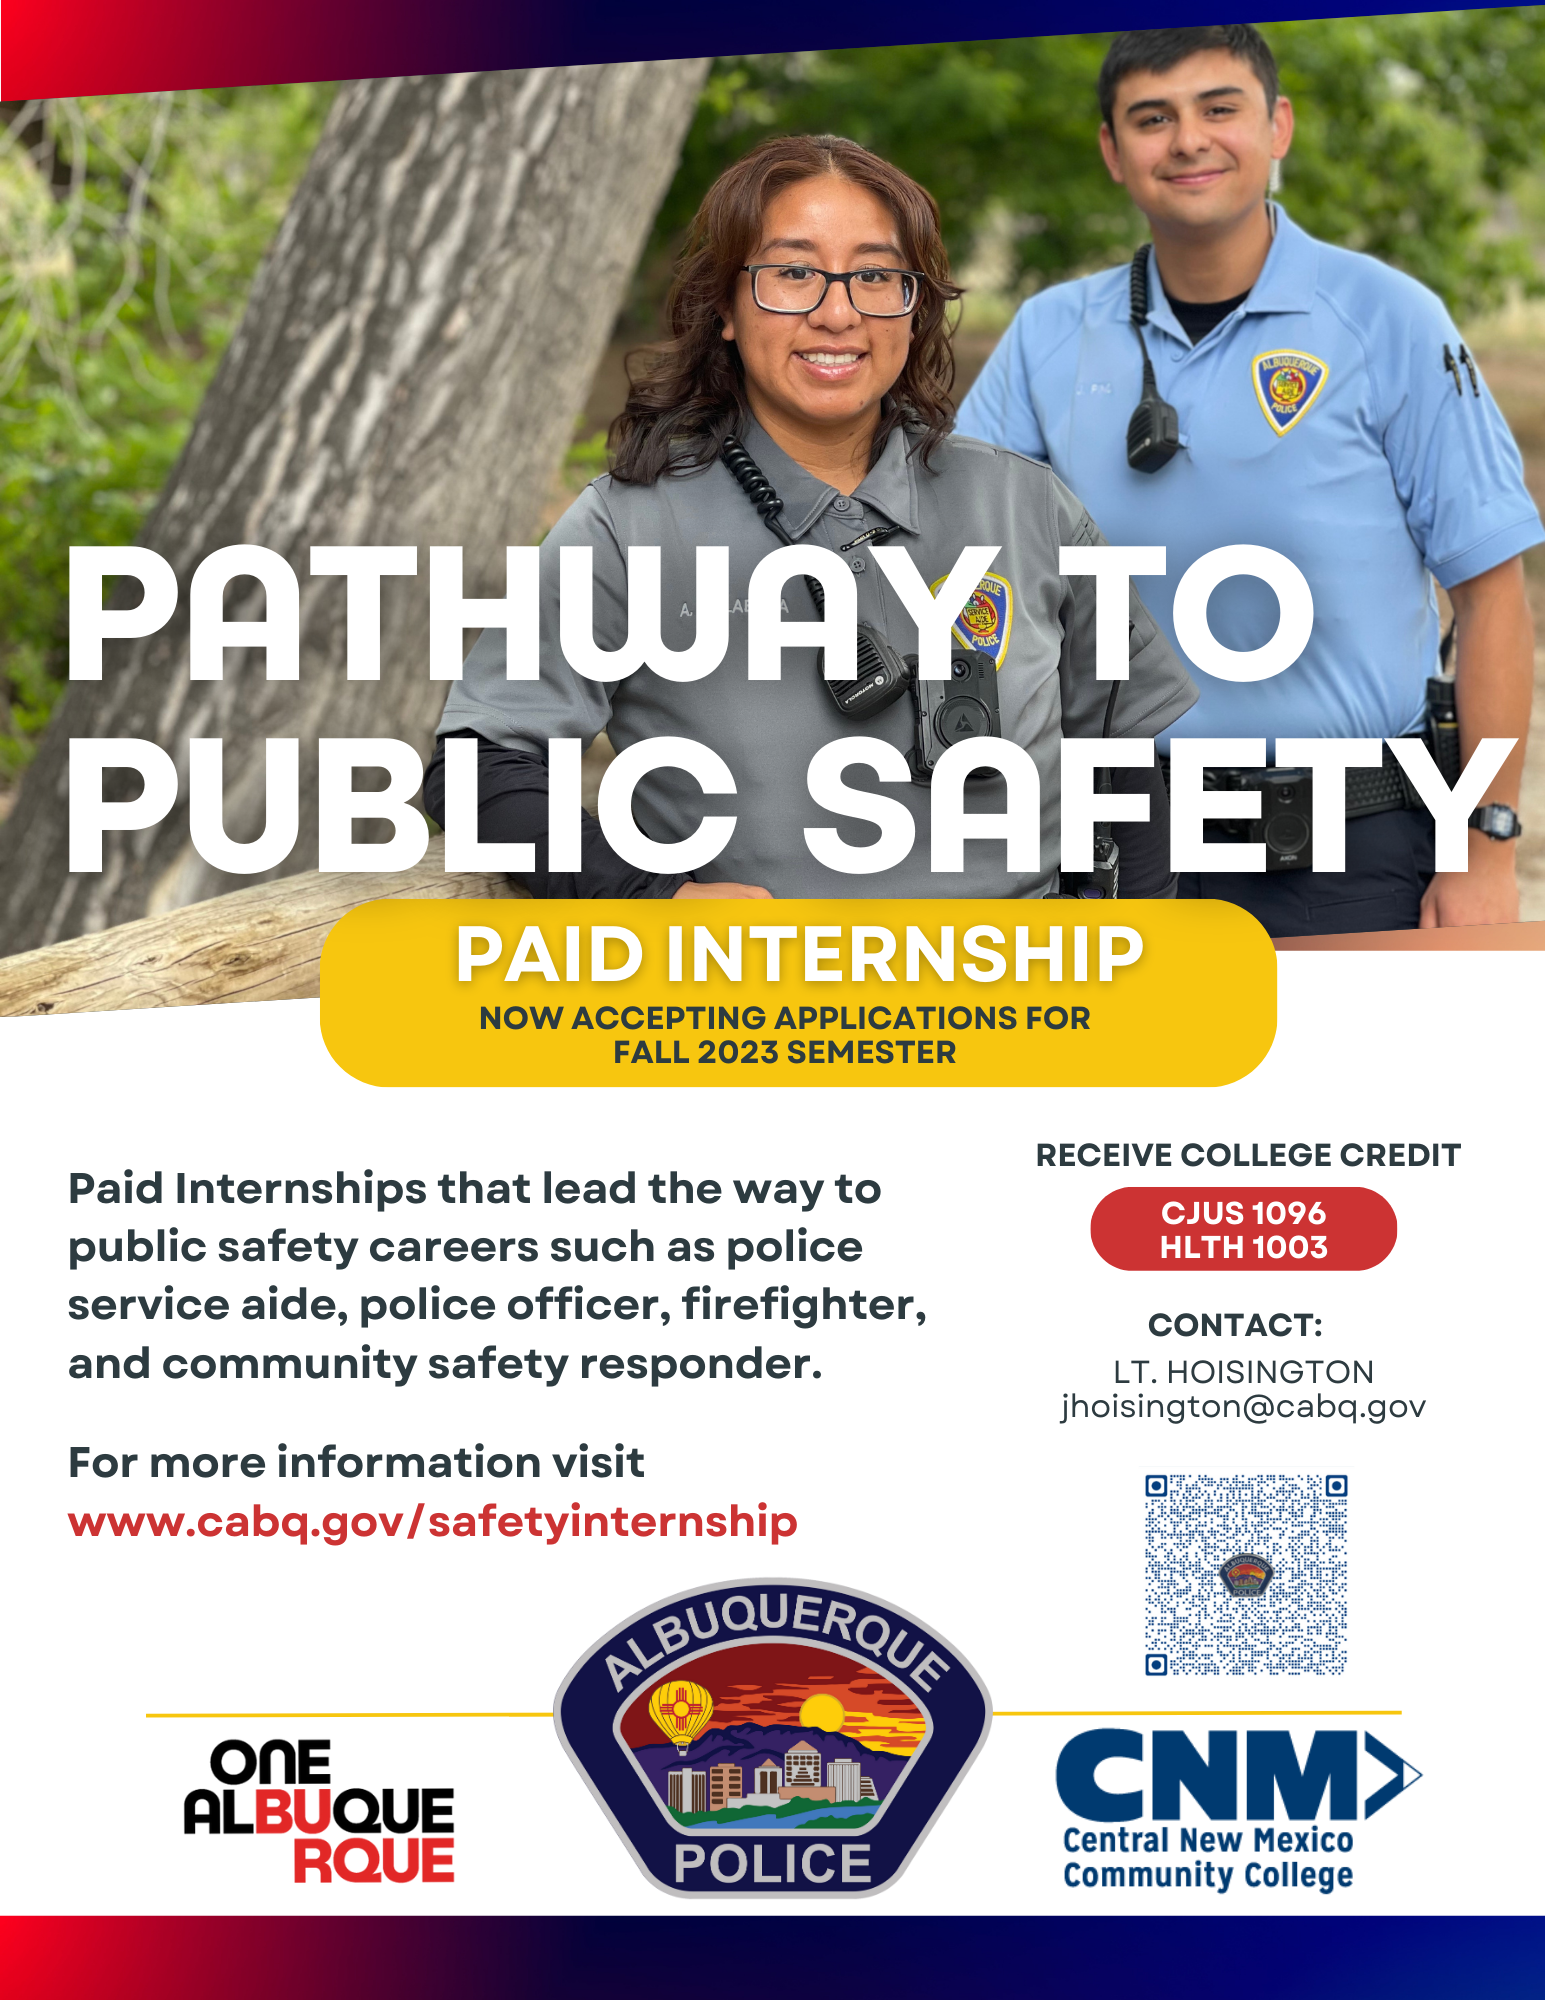 Pathway to public safety flyer